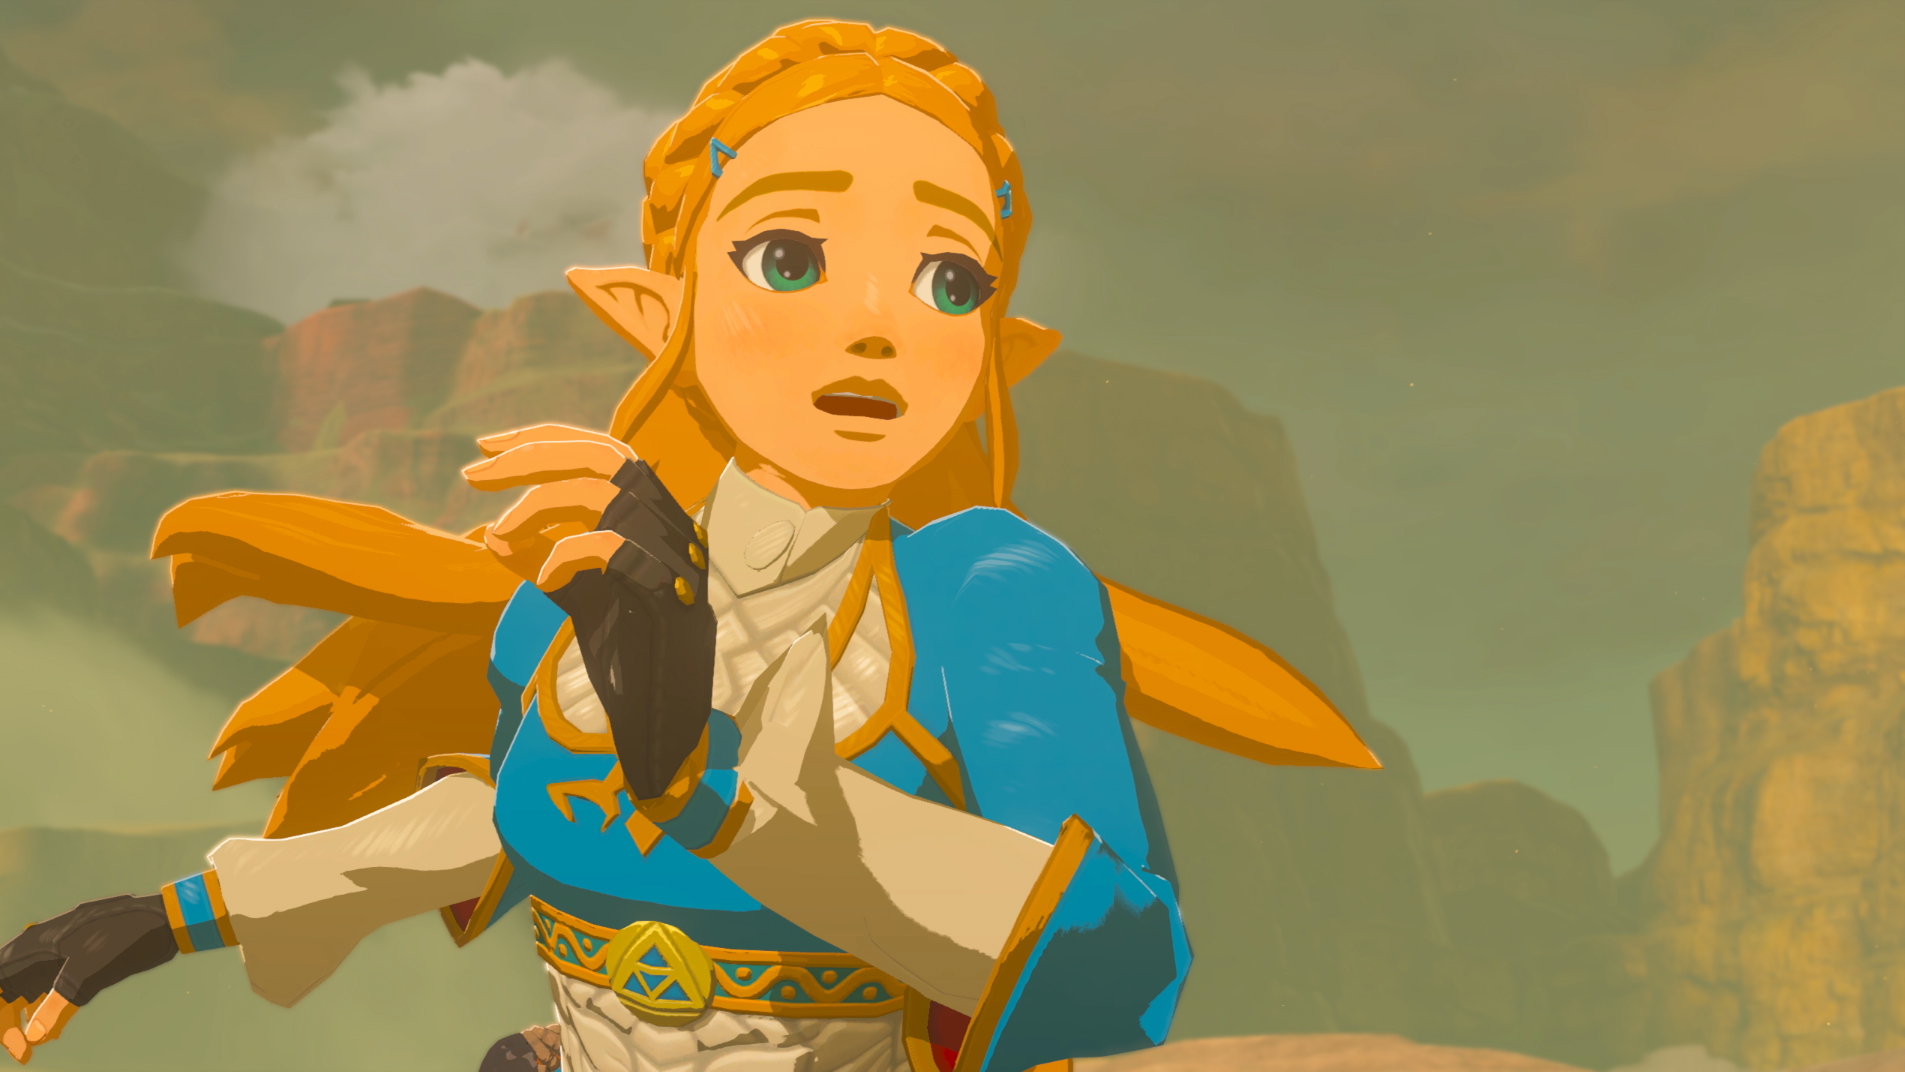 Zelda Breath of the Wild 2 news is coming next week, says reliable